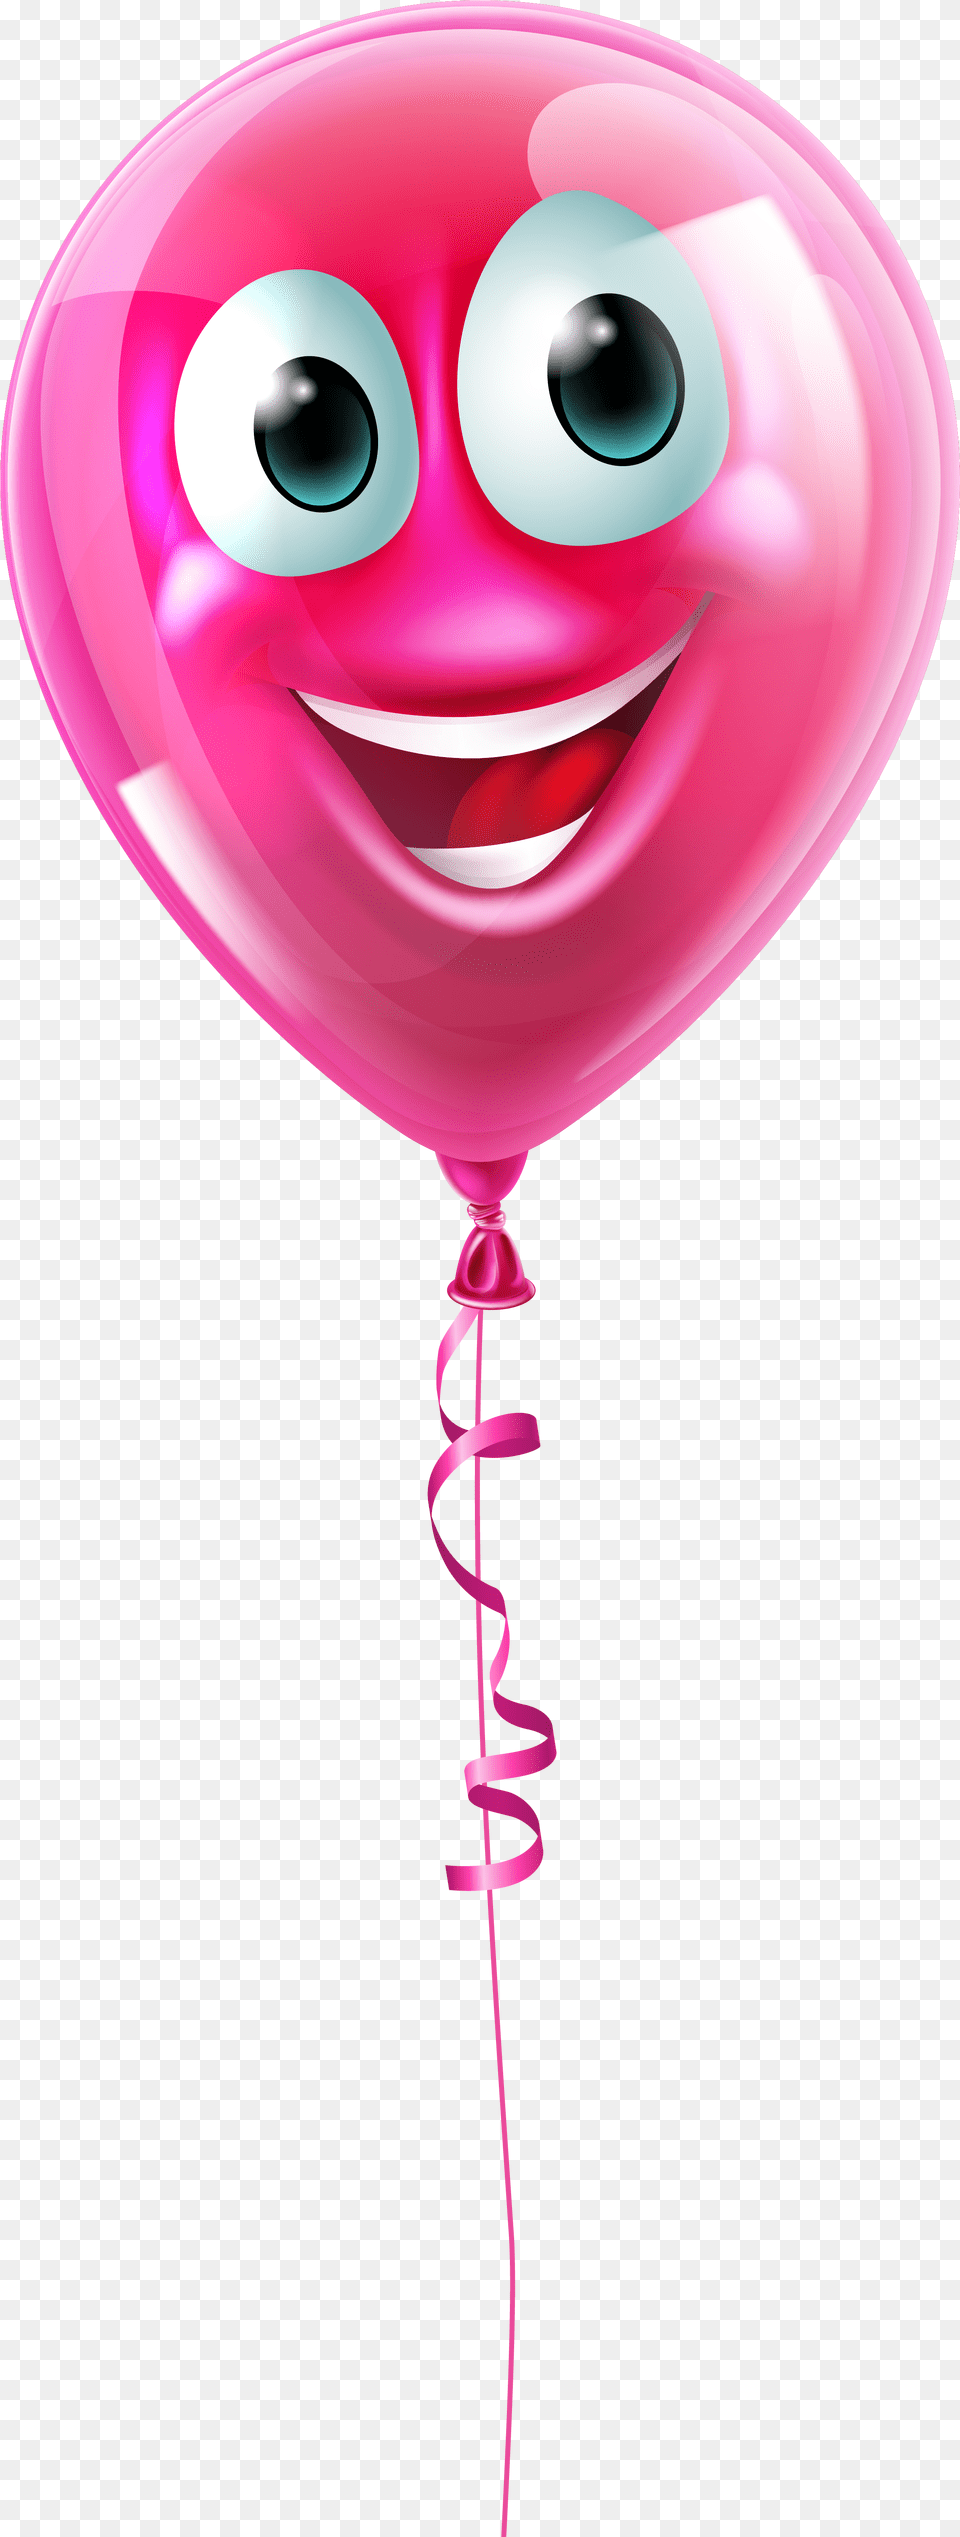 Smiley Clipart Balloon Balloon With Face Clipart Free Transparent Png